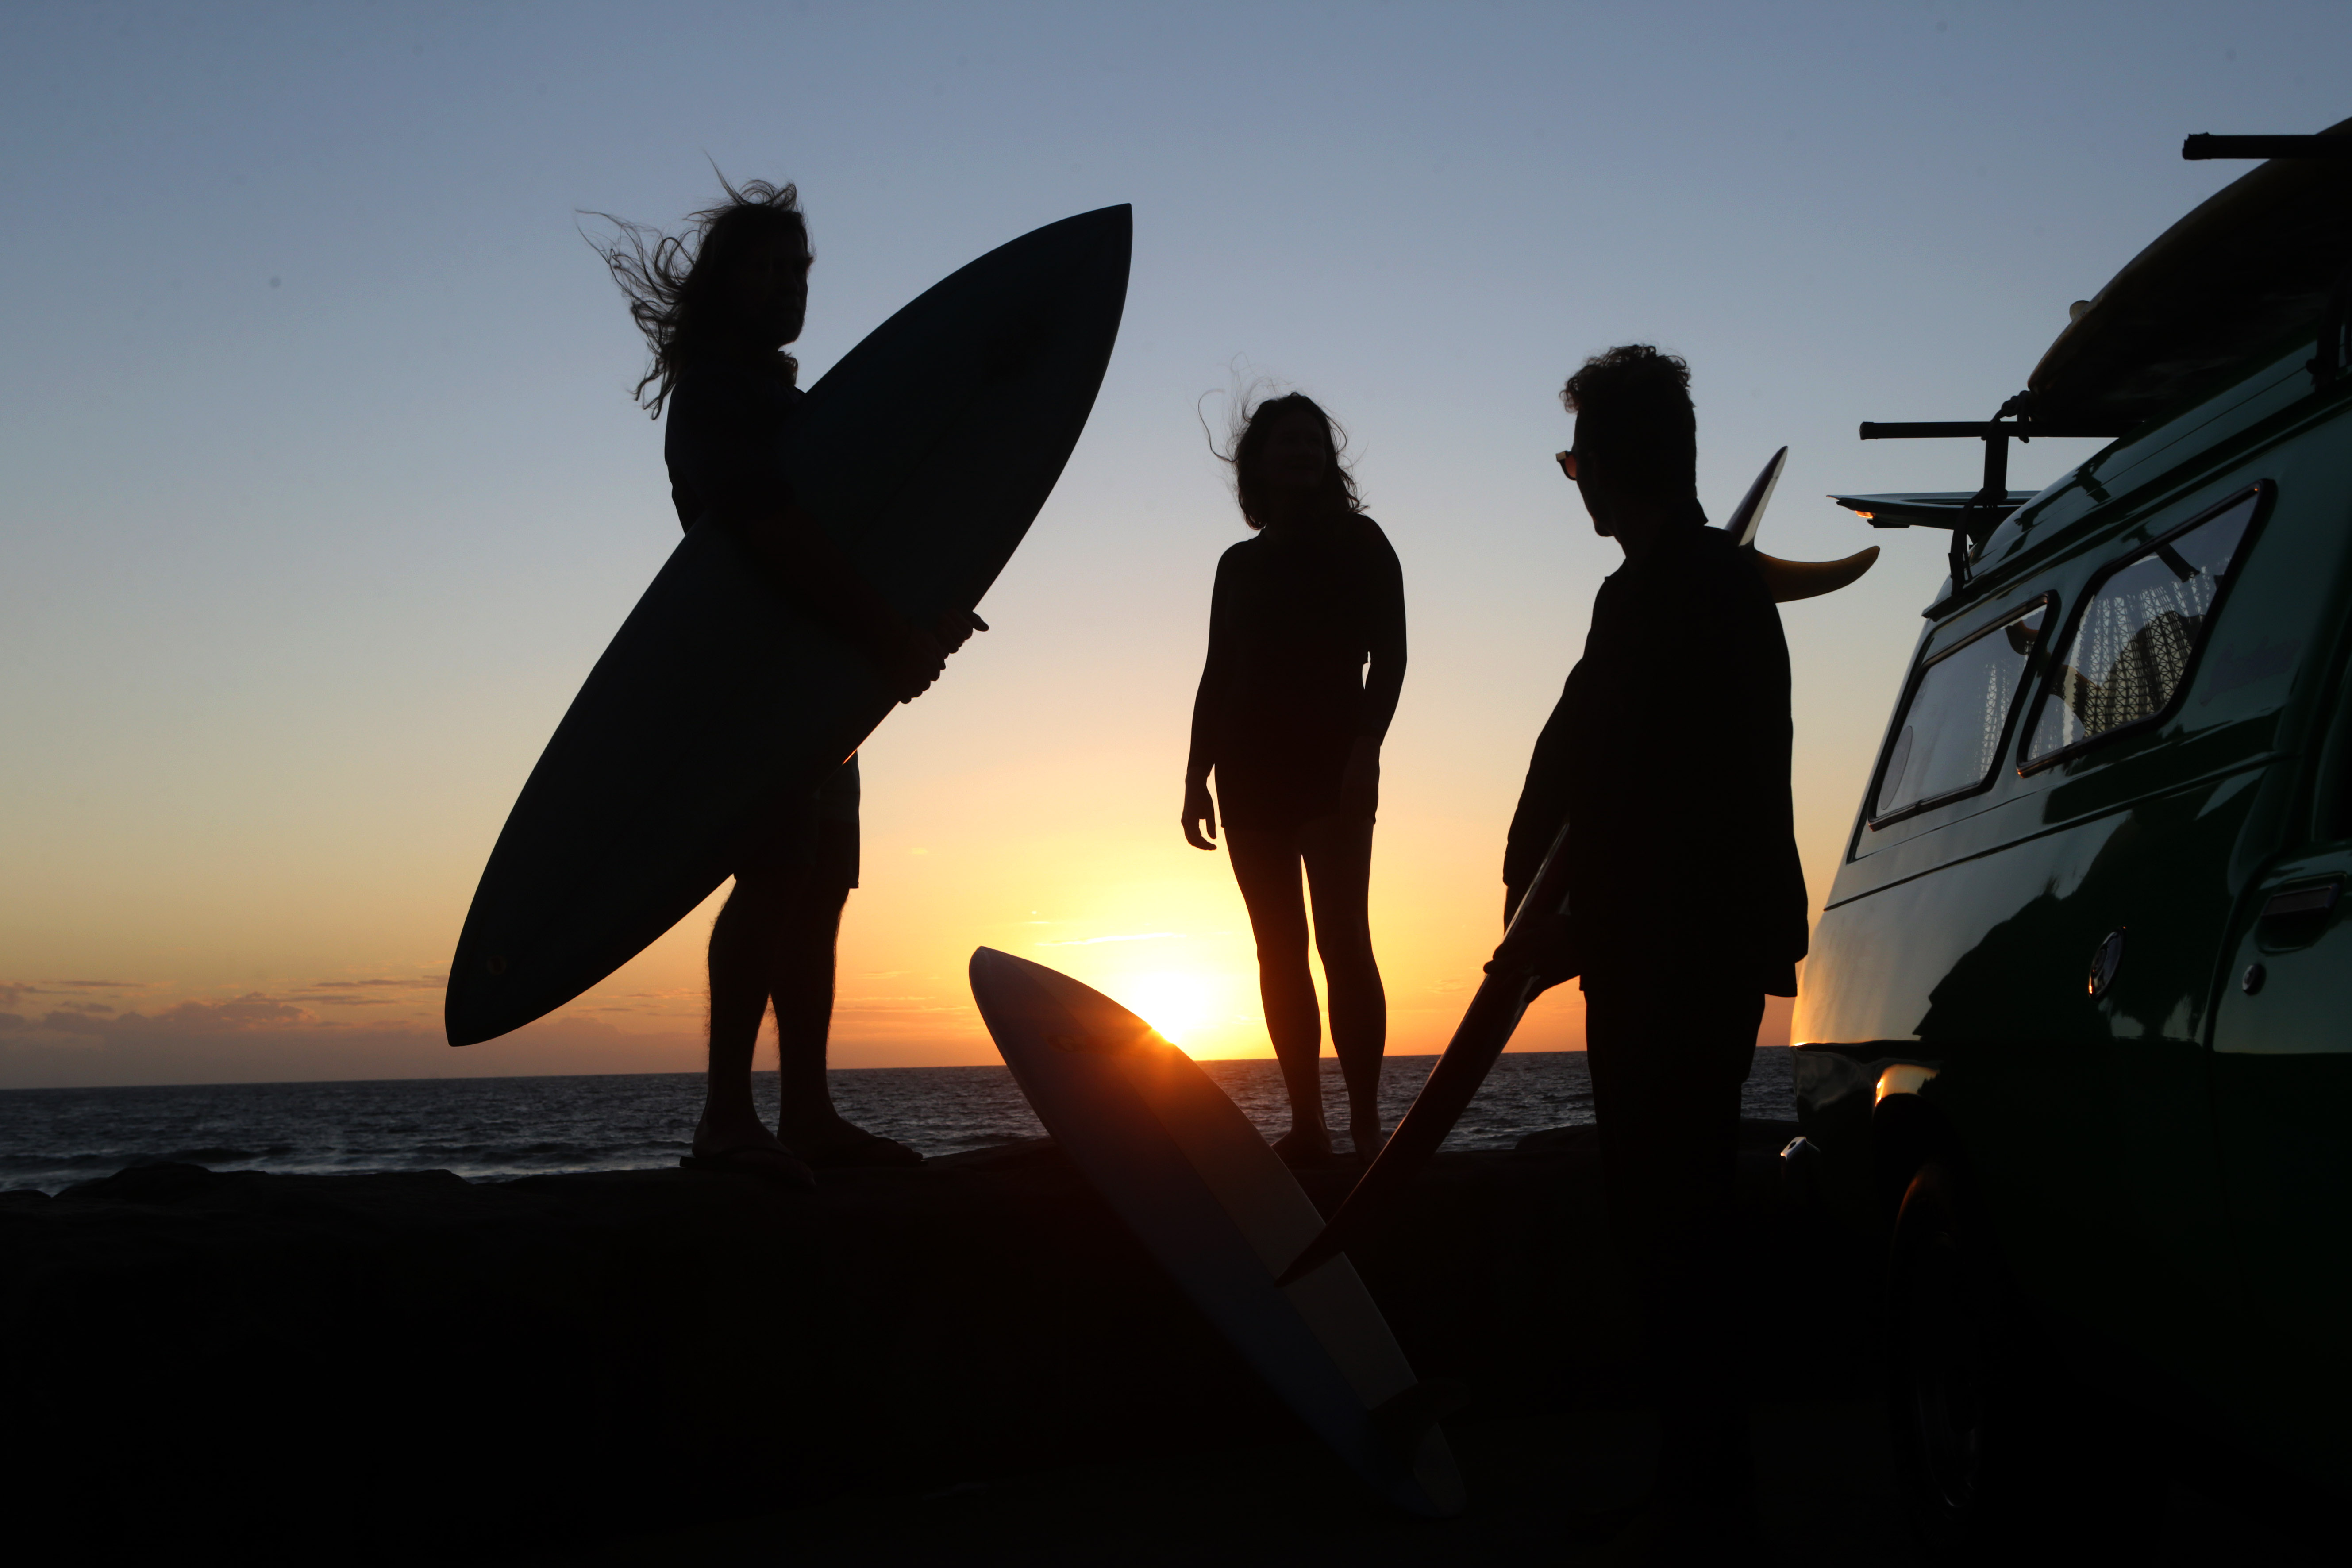 A photograph of three surfers at dawn.